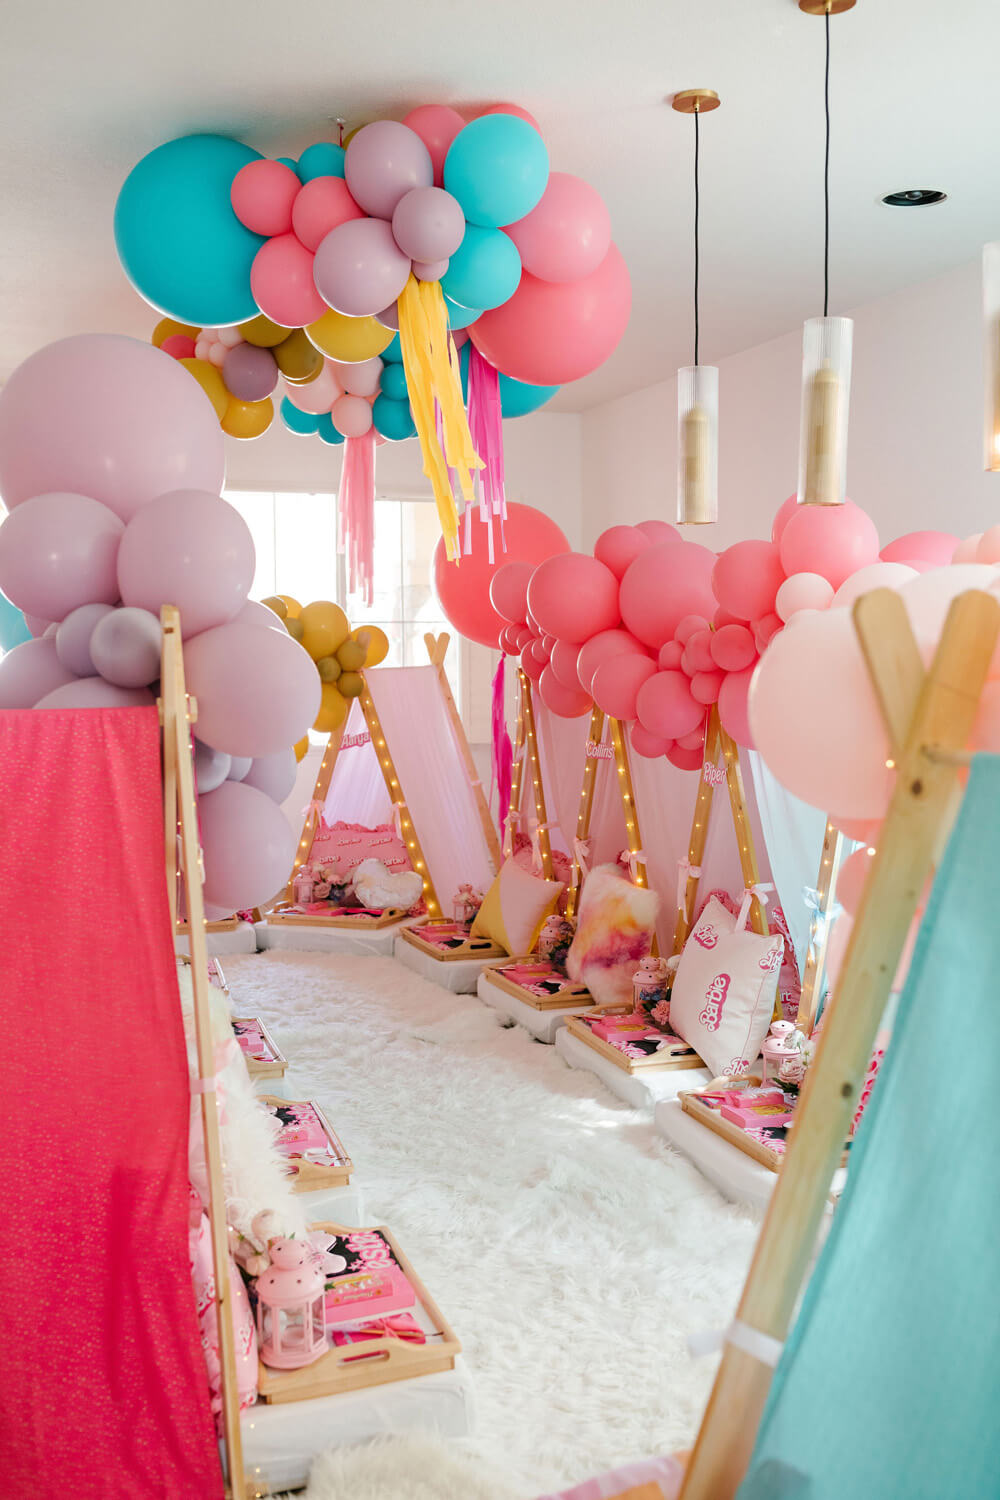 Pink barbie birthday party sleep under with colorful balloon decorations